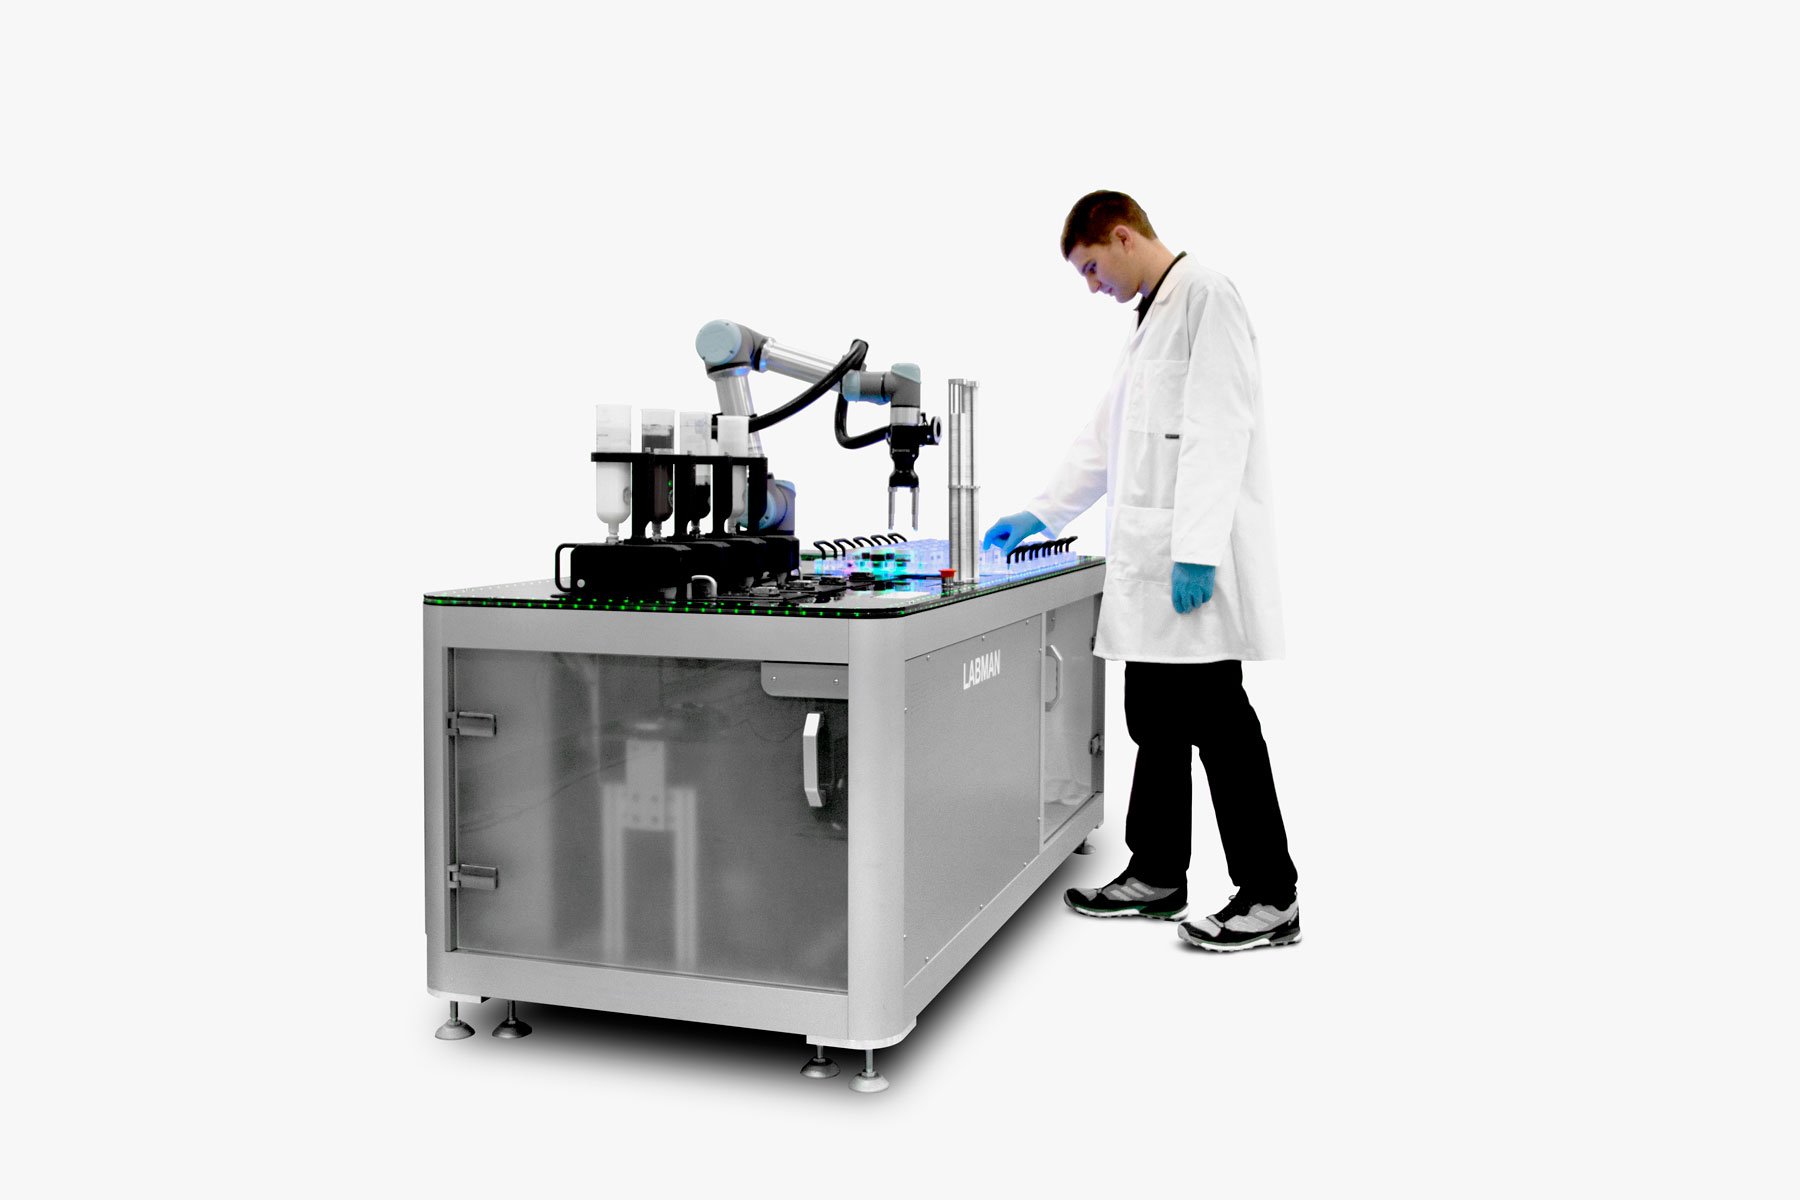 Man wearing lab coat and blue gloves standing at collaborative formulator loading vials into the rack